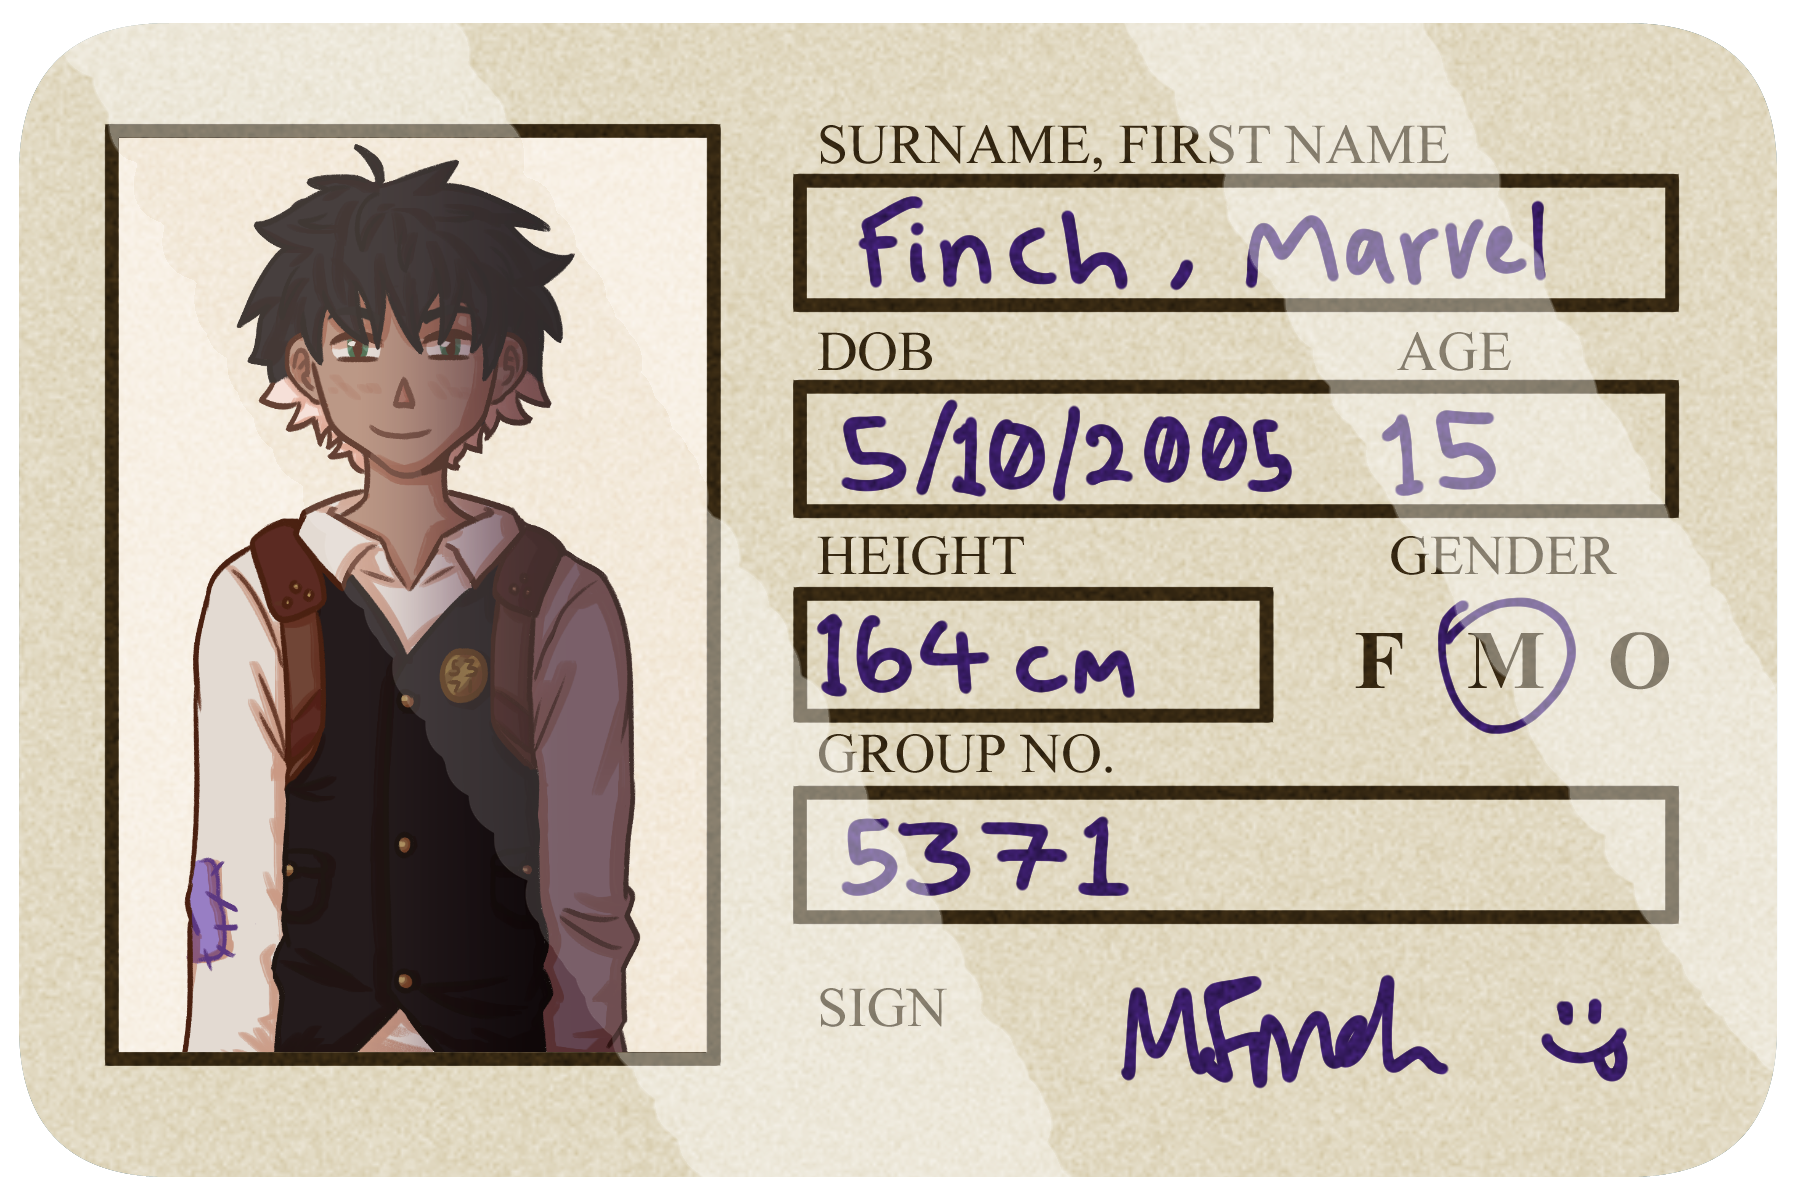 A card with details about Marvel Finch